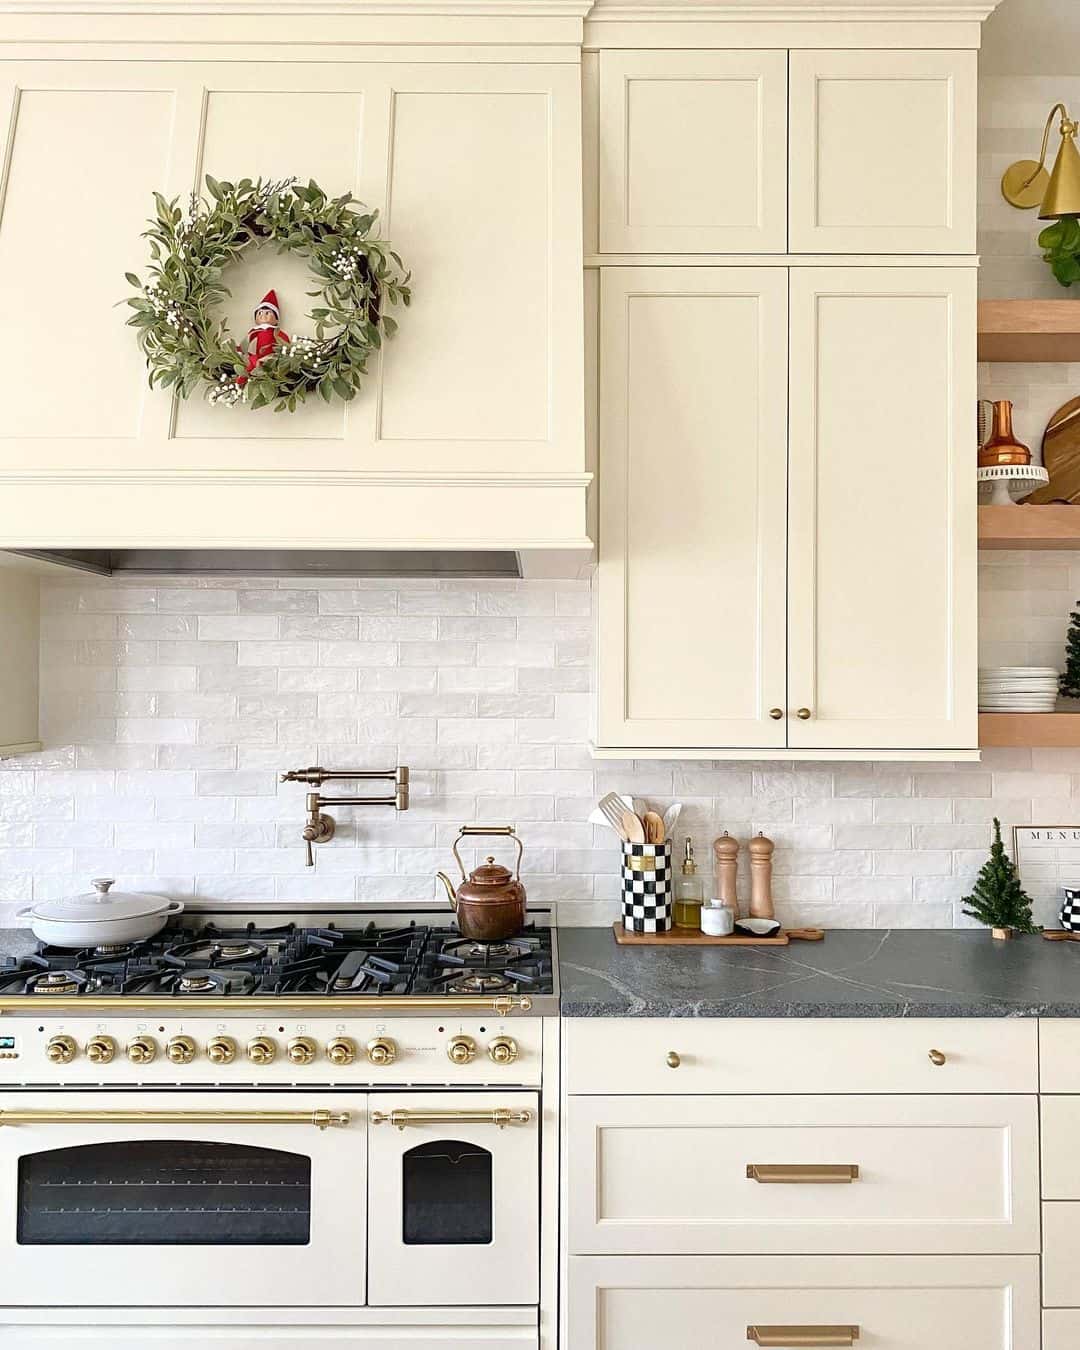 Gold Kitchen Hardware Enriches Cream Colored Cabinets Soul And Lane